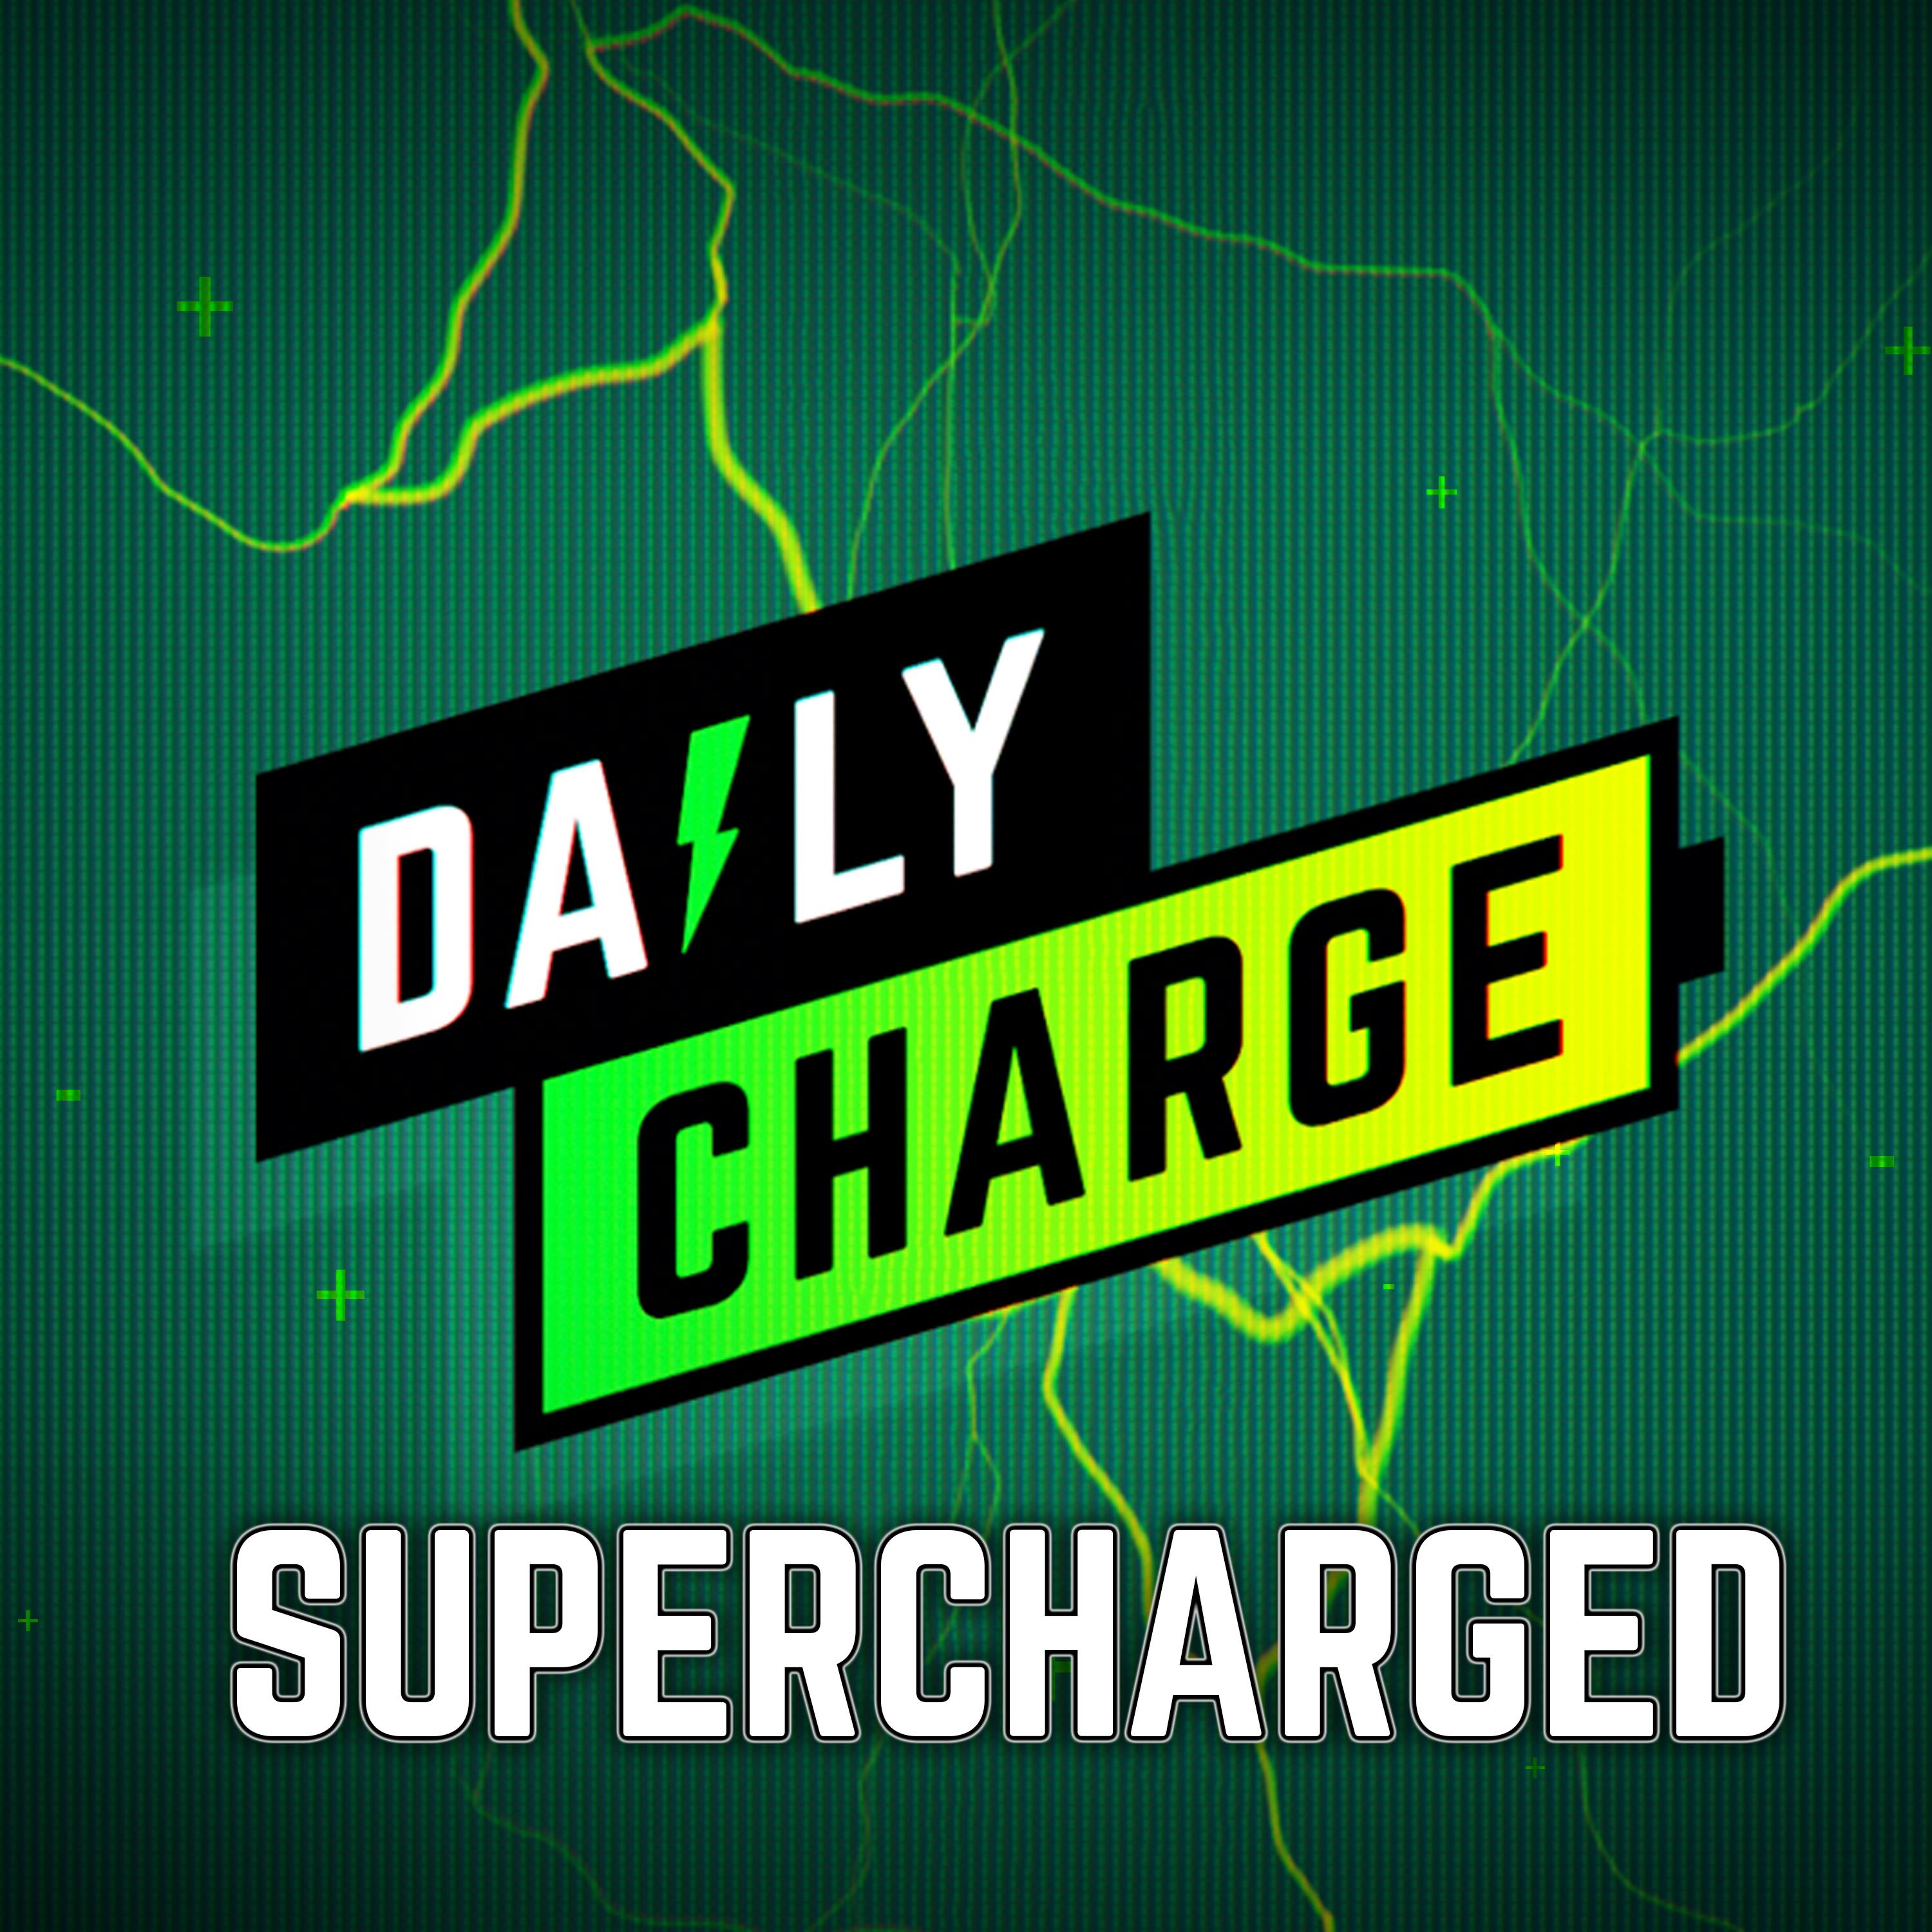 What alternatives are there for MWC? (The Daily SUPERCharge, 2/13/2020)